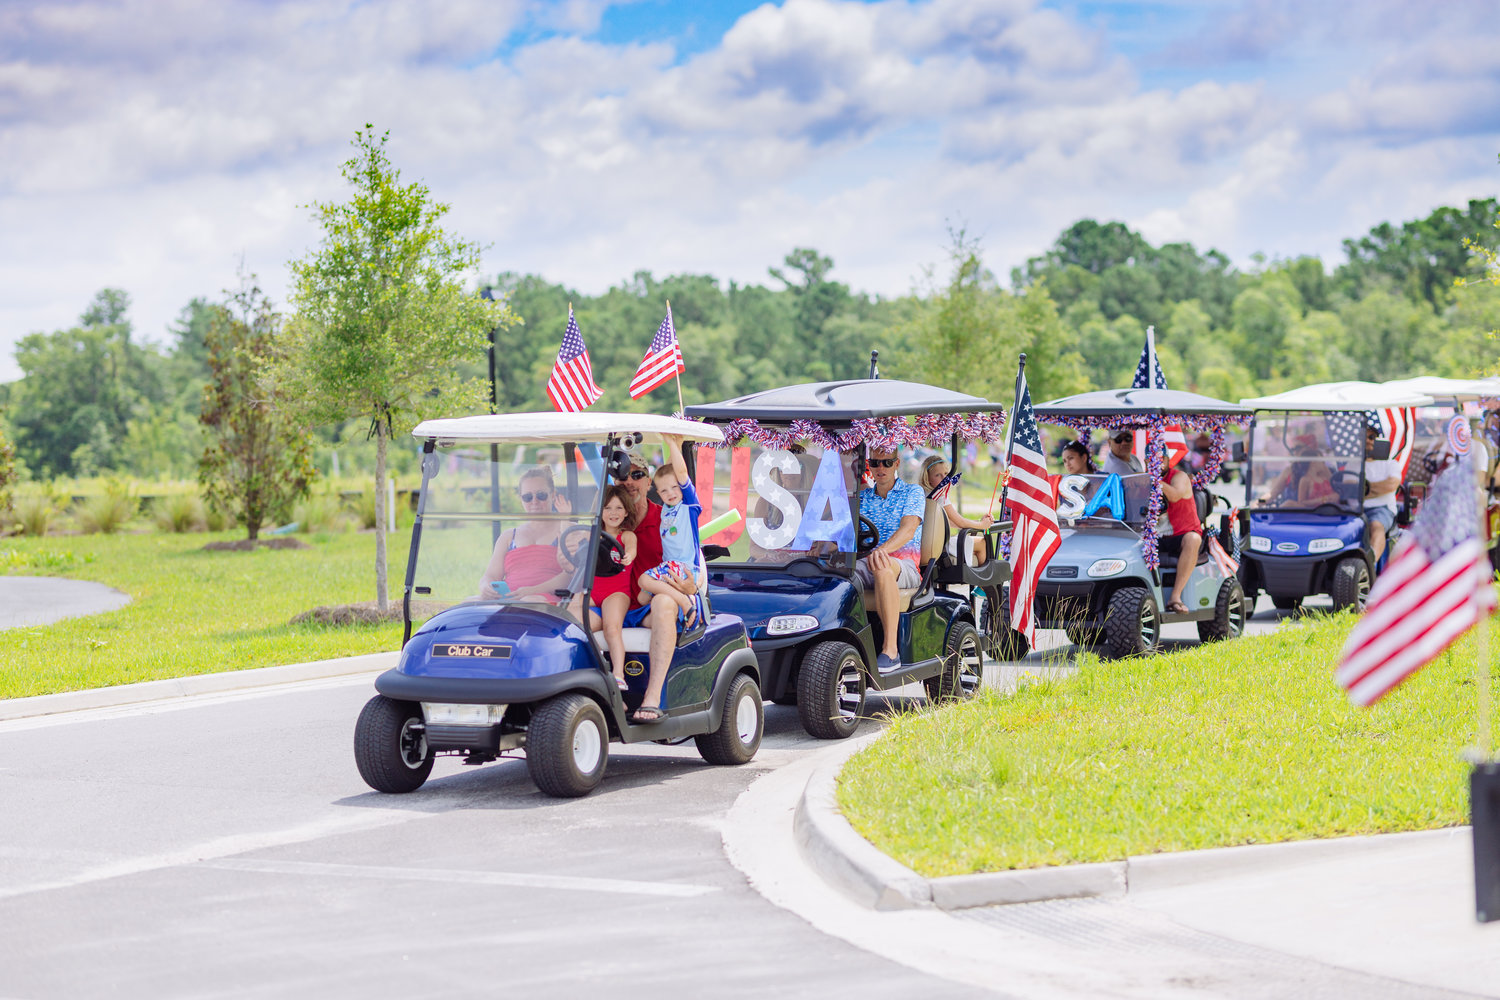 Golf carts decorated in a patriotic theme parade through Shearwater.